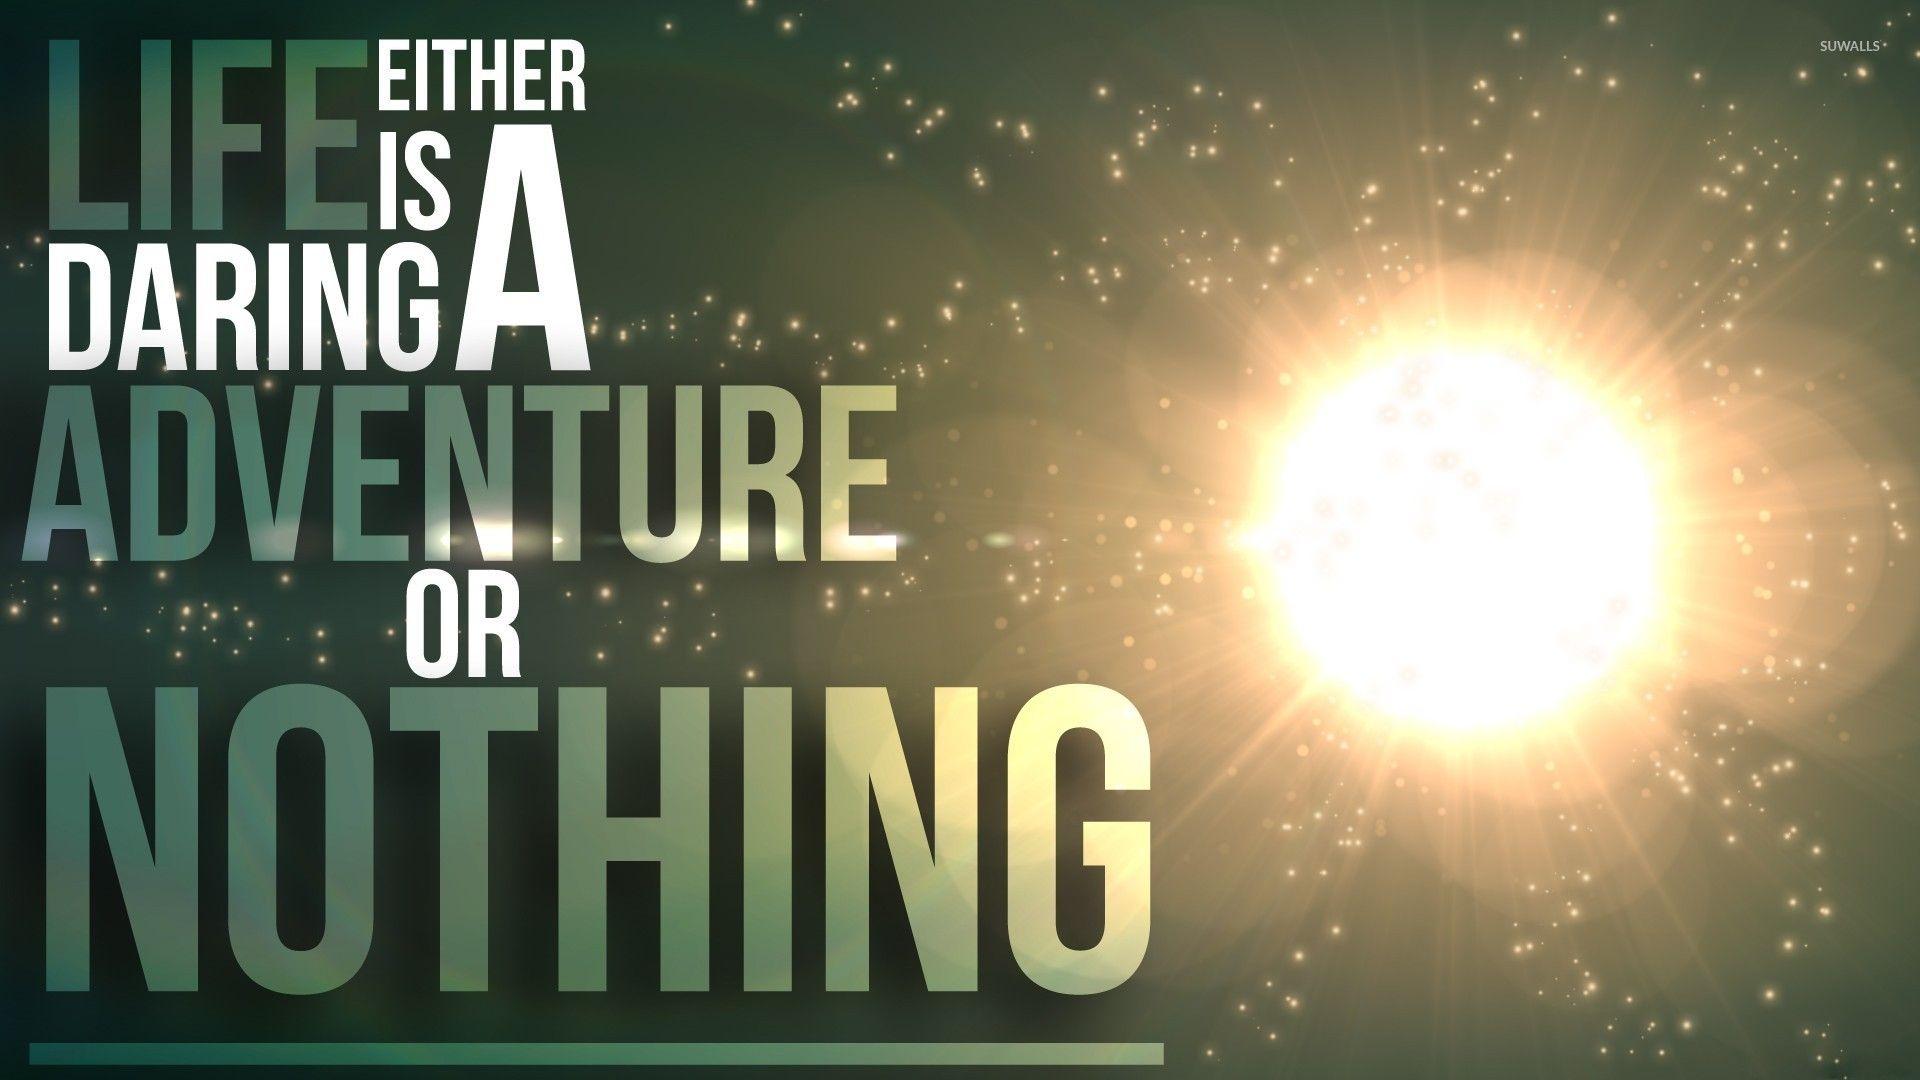 Life is an adventure or nothing wallpaper wallpaper